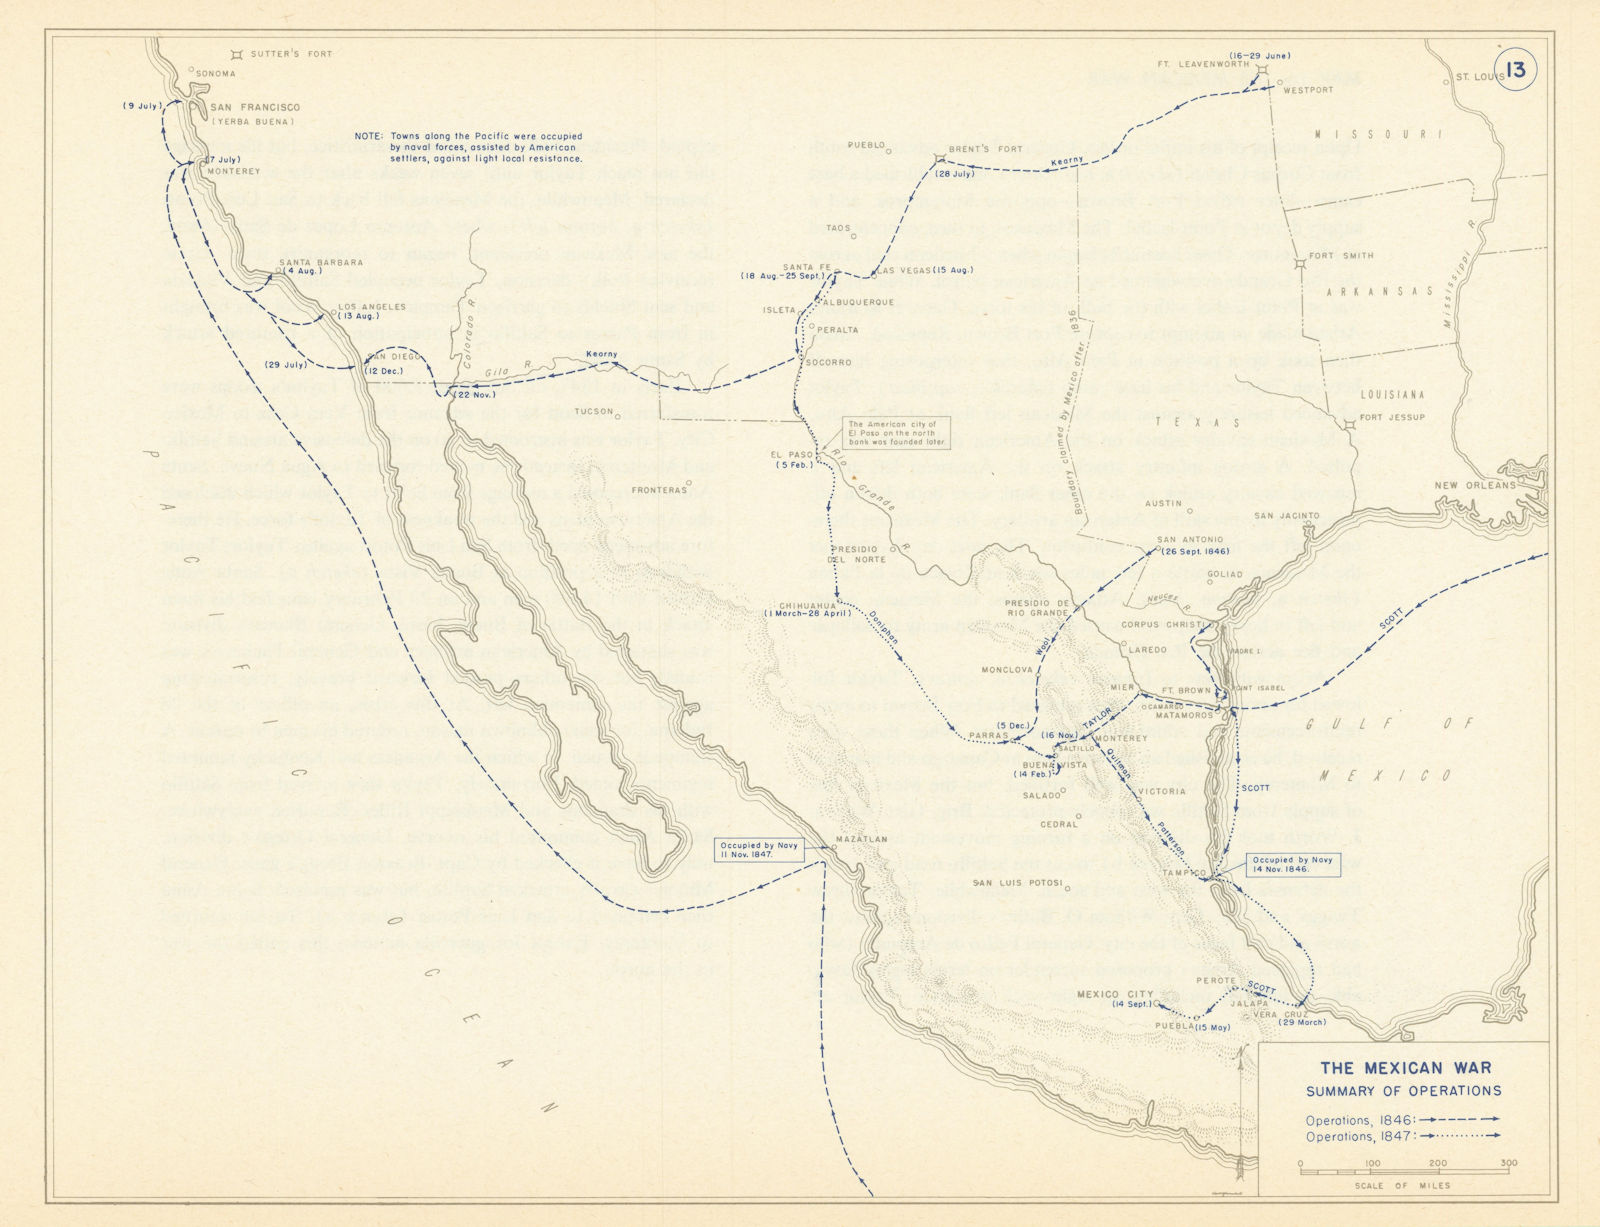 Mexican-American War. Summary of Operations 1846-1847. Mexico 1959 old map